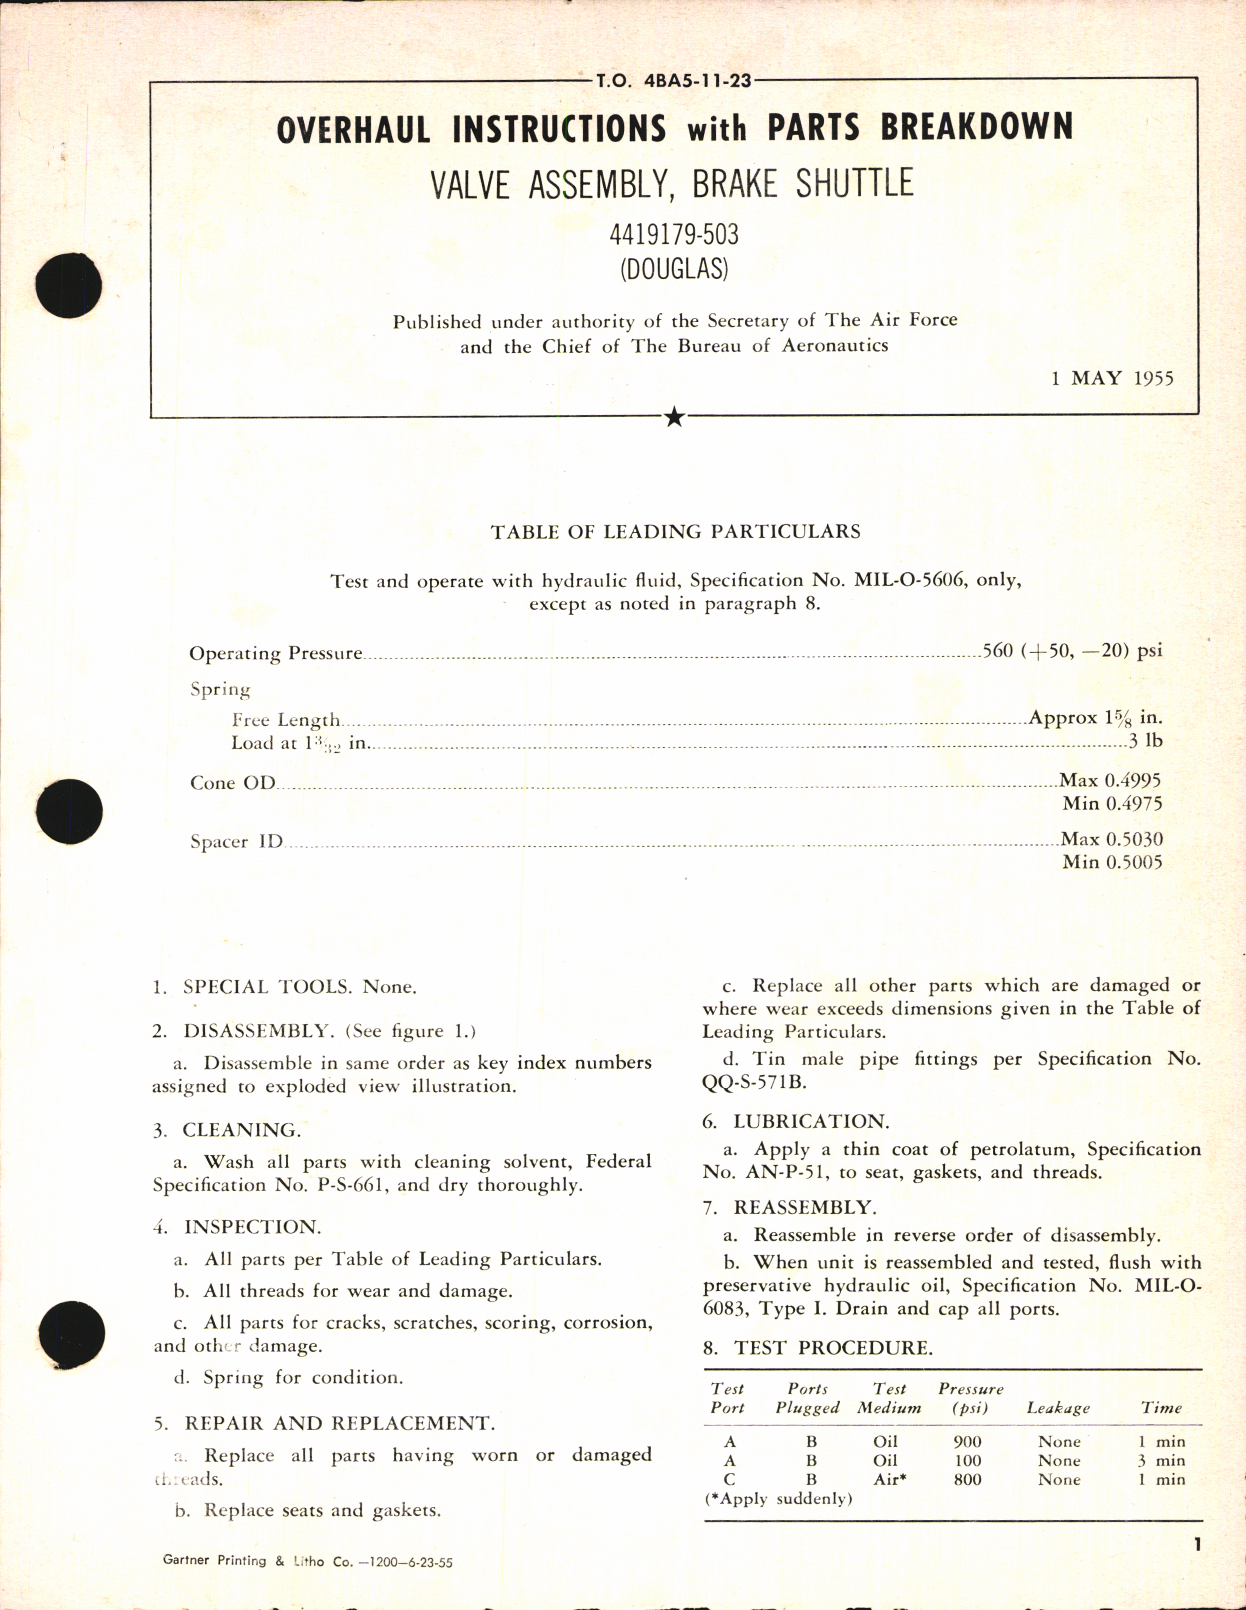 Sample page 1 from AirCorps Library document: Overhaul Instructions with Parts Breakdown for Valve Assembly, Brake Shuttle 4419179-503